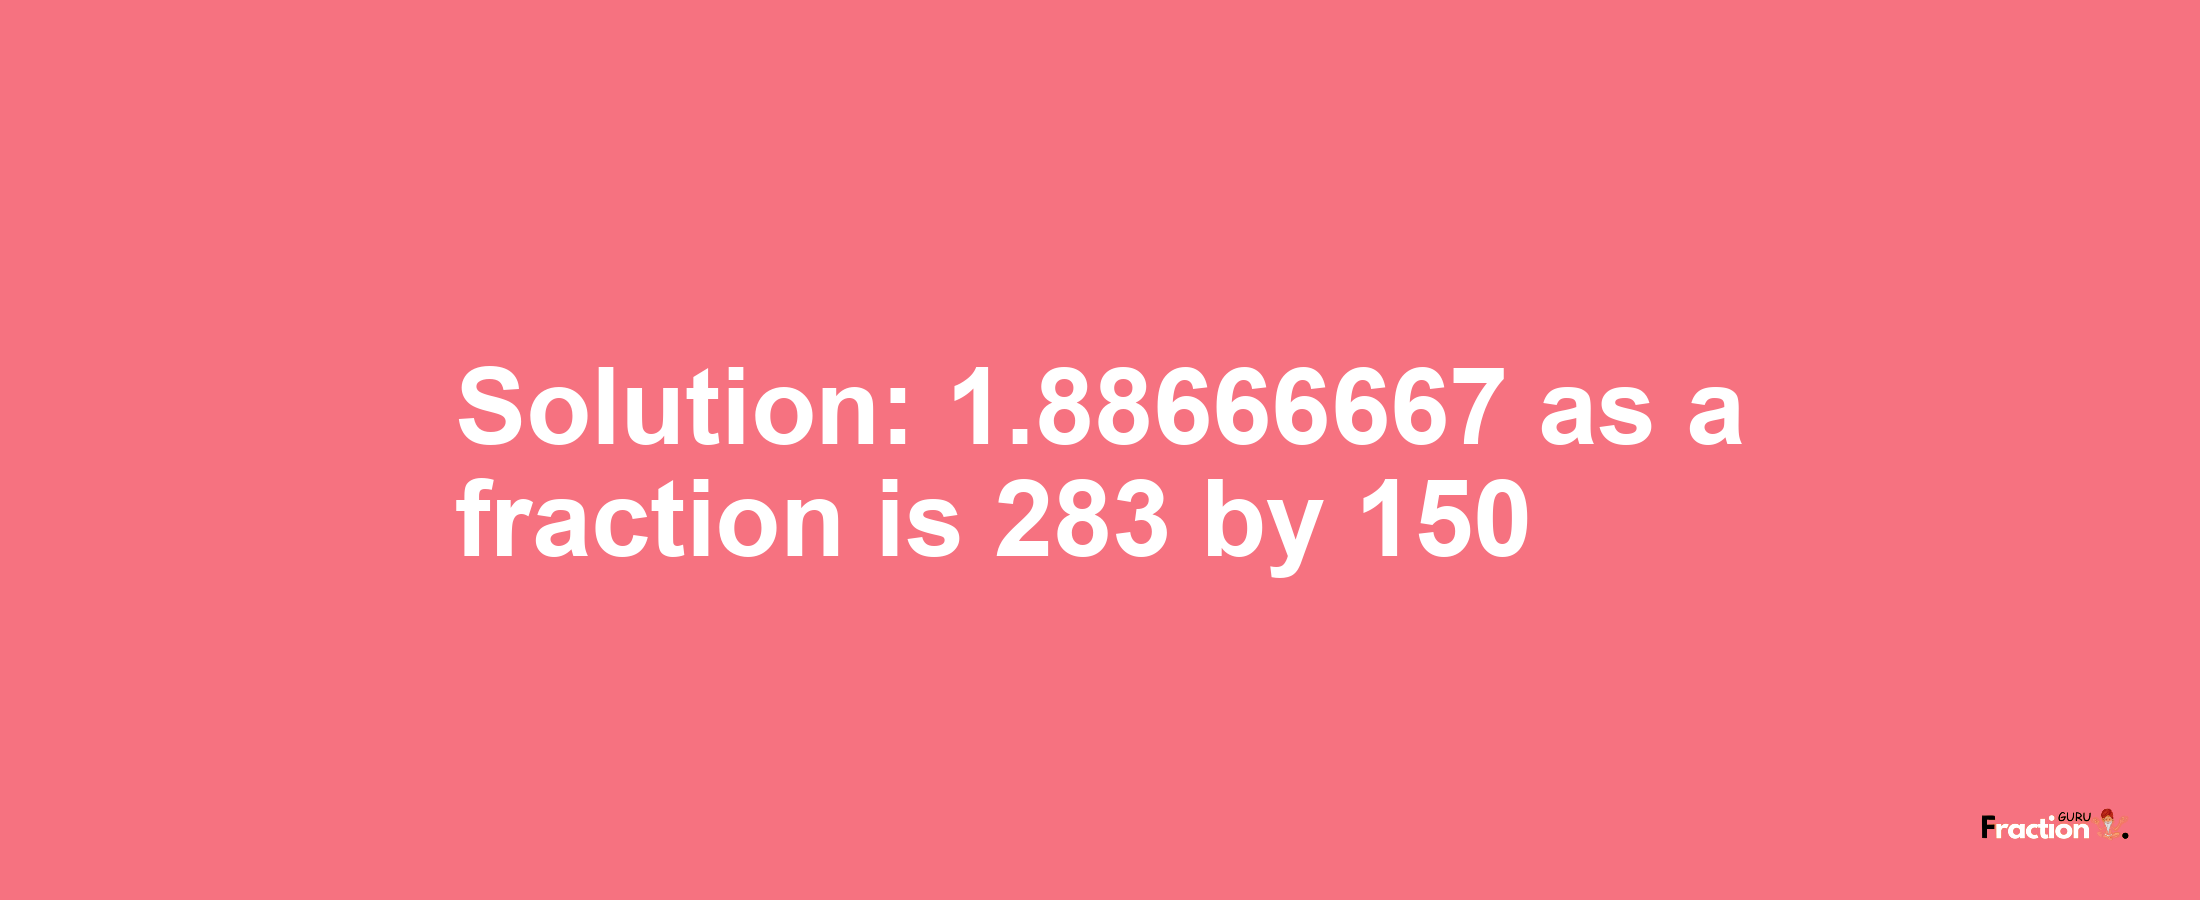 Solution:1.88666667 as a fraction is 283/150